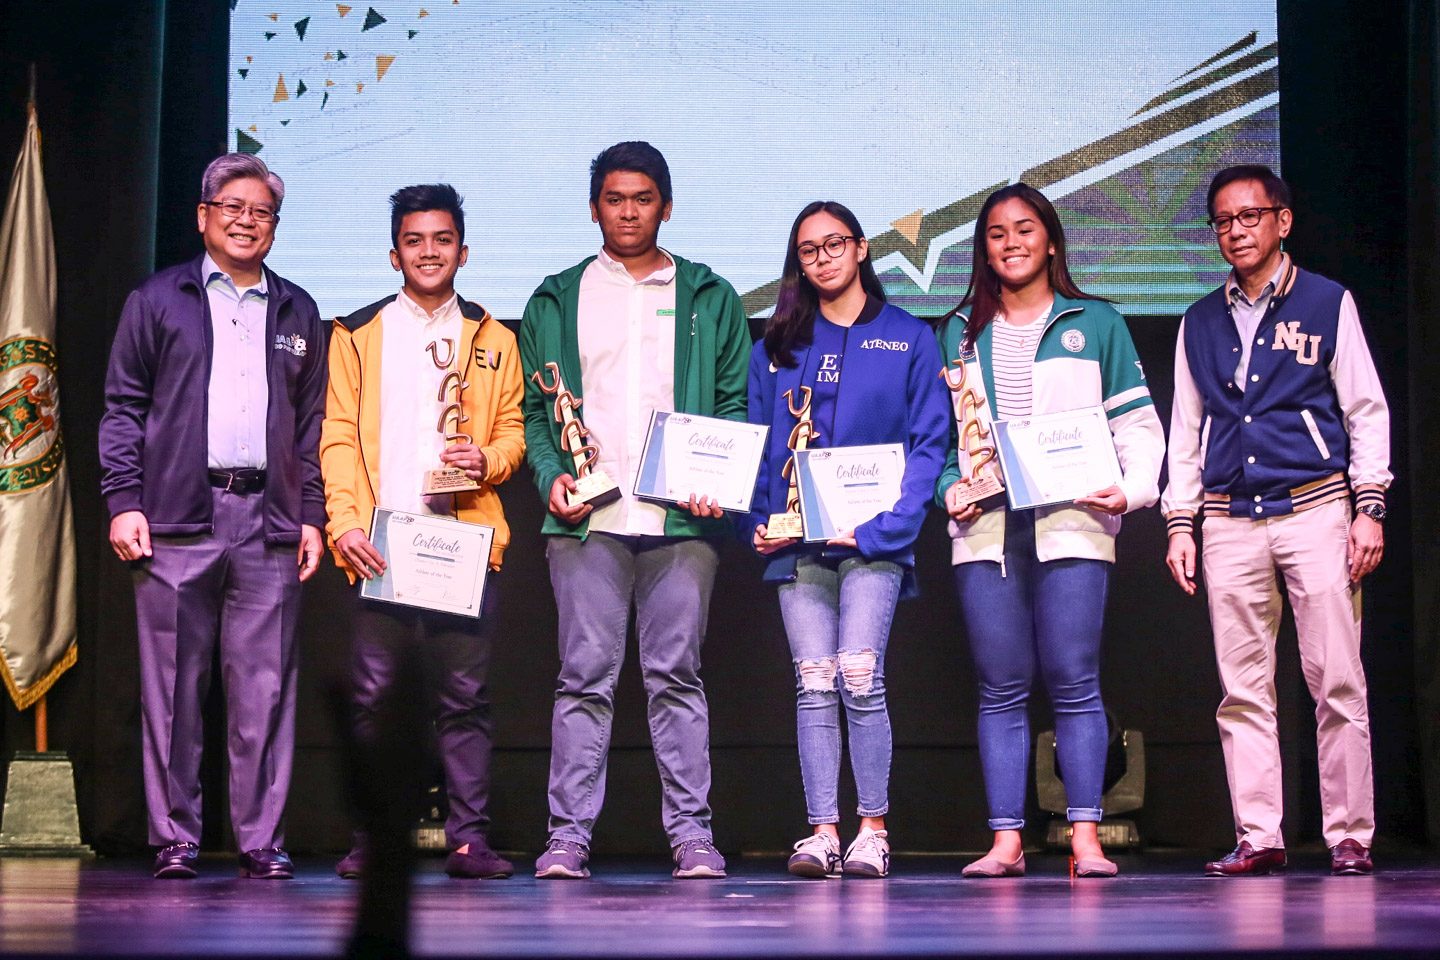 UAAP Season 80 Athletes of the Year mark milestone after first MVP plums